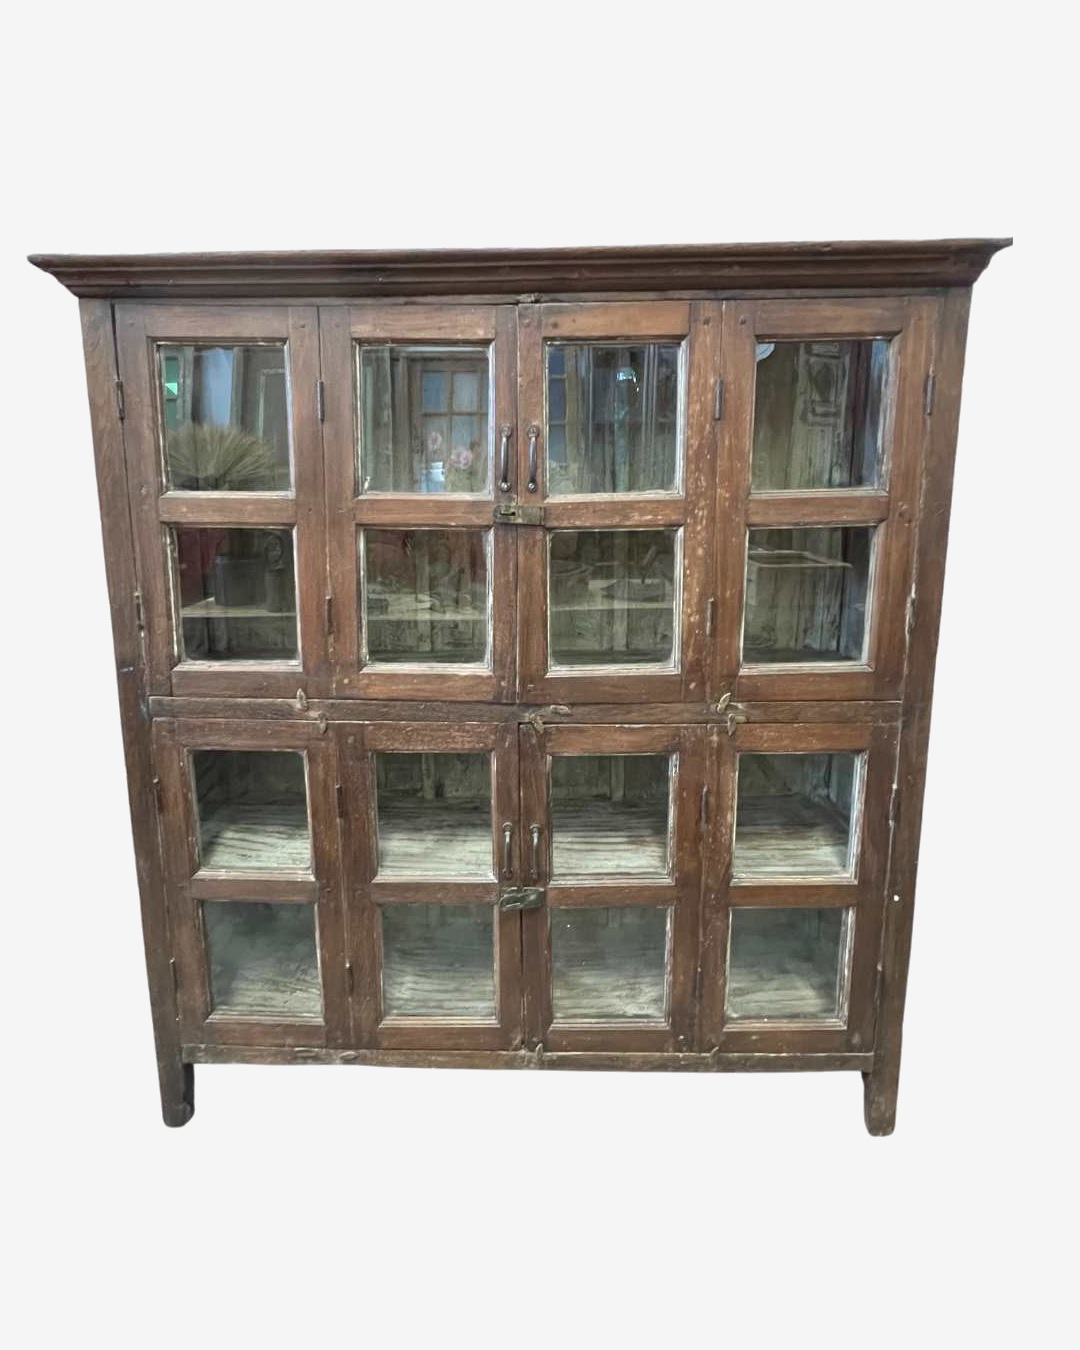 Vintage almirah and glass cabinet with 4 shelves and 16 glass panes